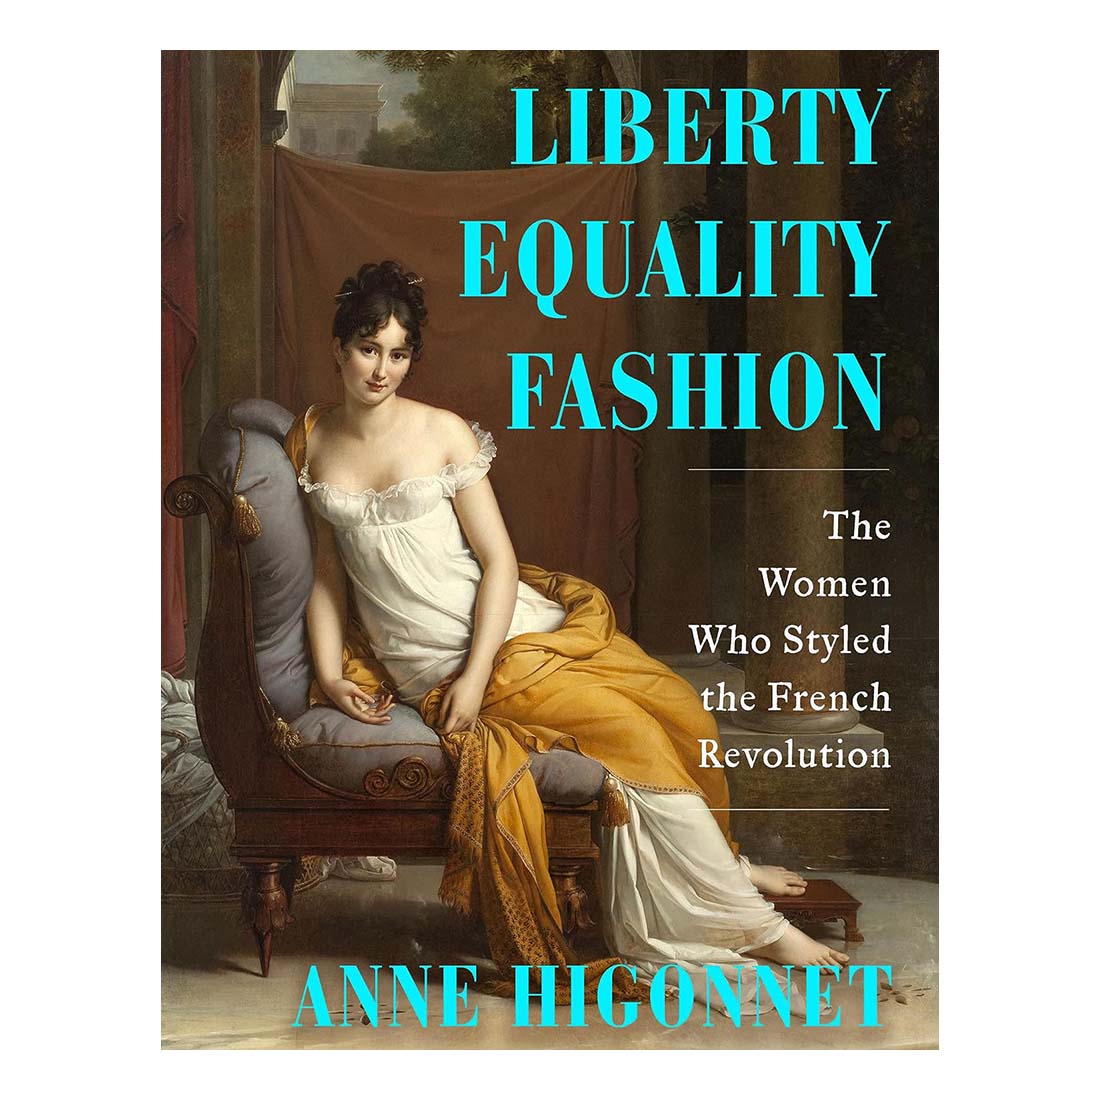 Liberty, Equality, Fashion: The Women Who Styled the French Revolution